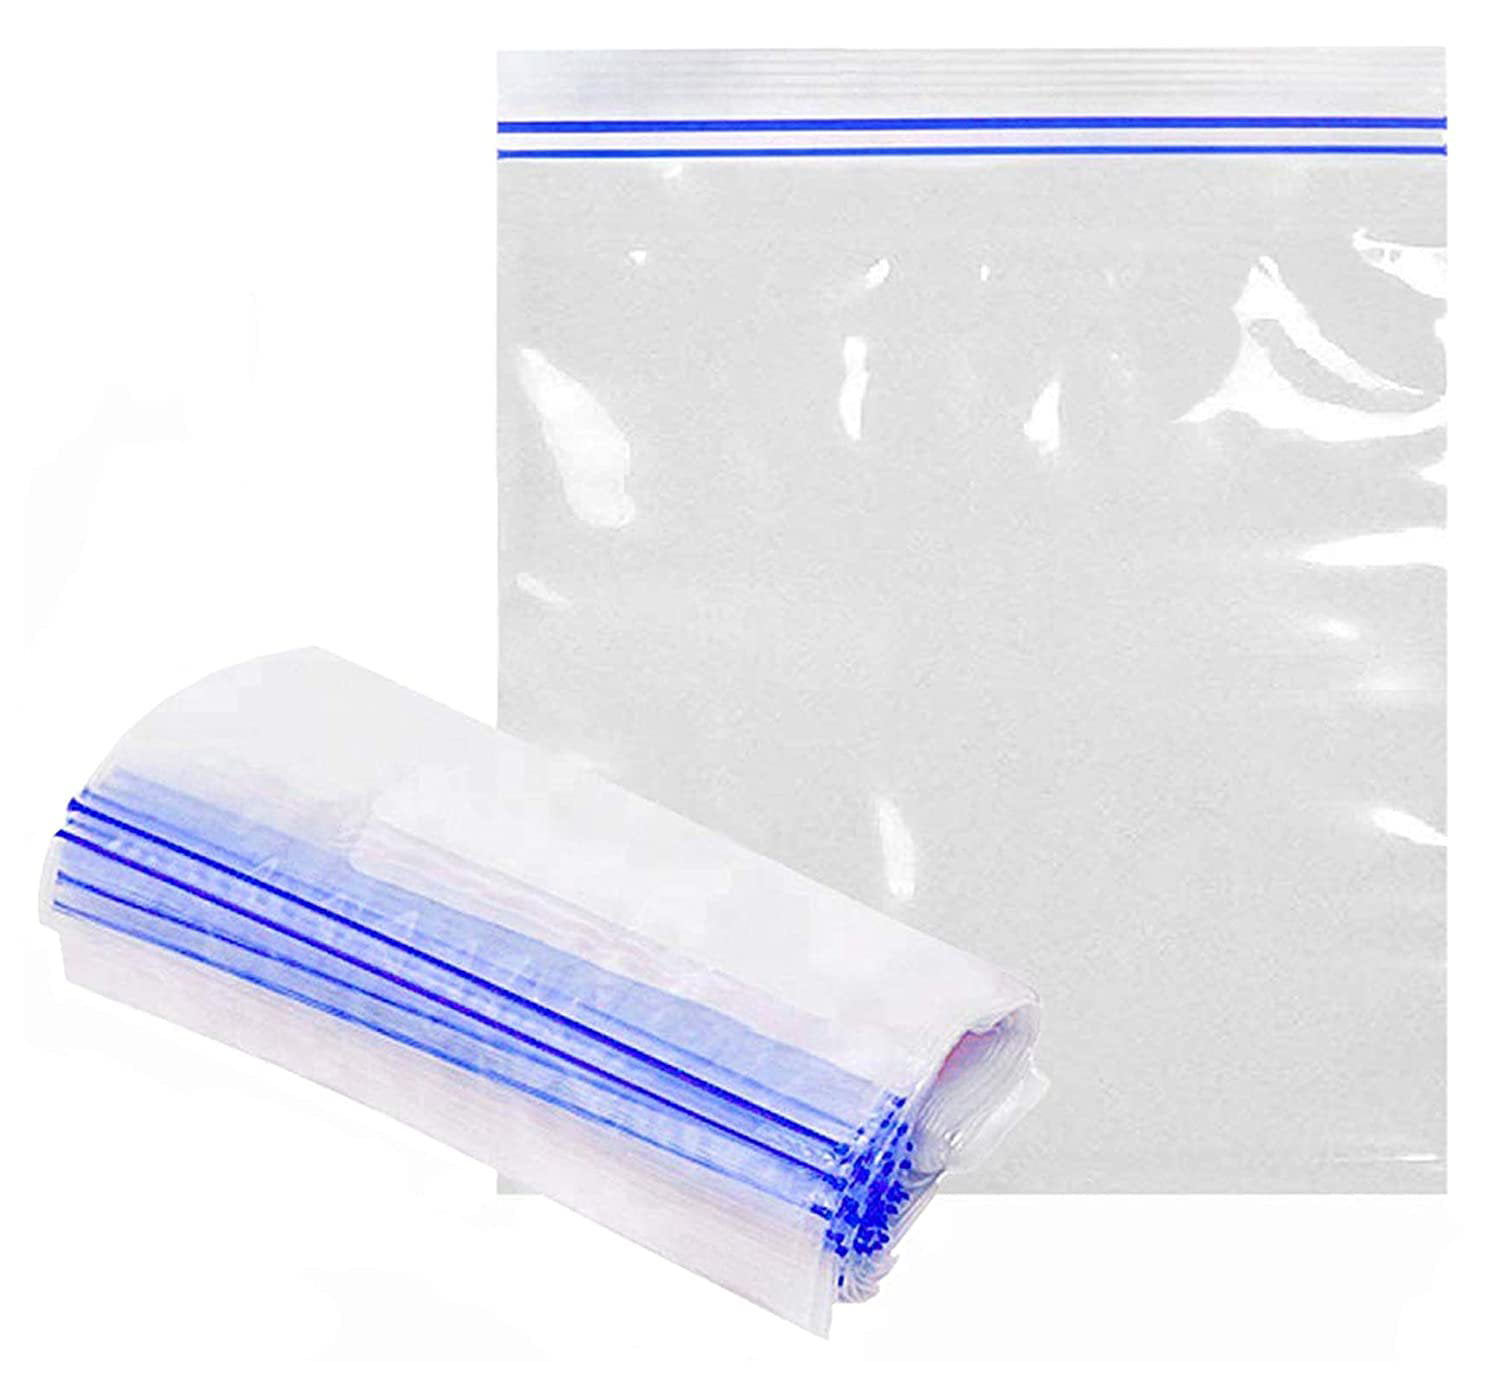 2 Mil Clear Reclosable Bags 7" x 9" Freezer Storage Top Seal Polybag 1000 Pieces 